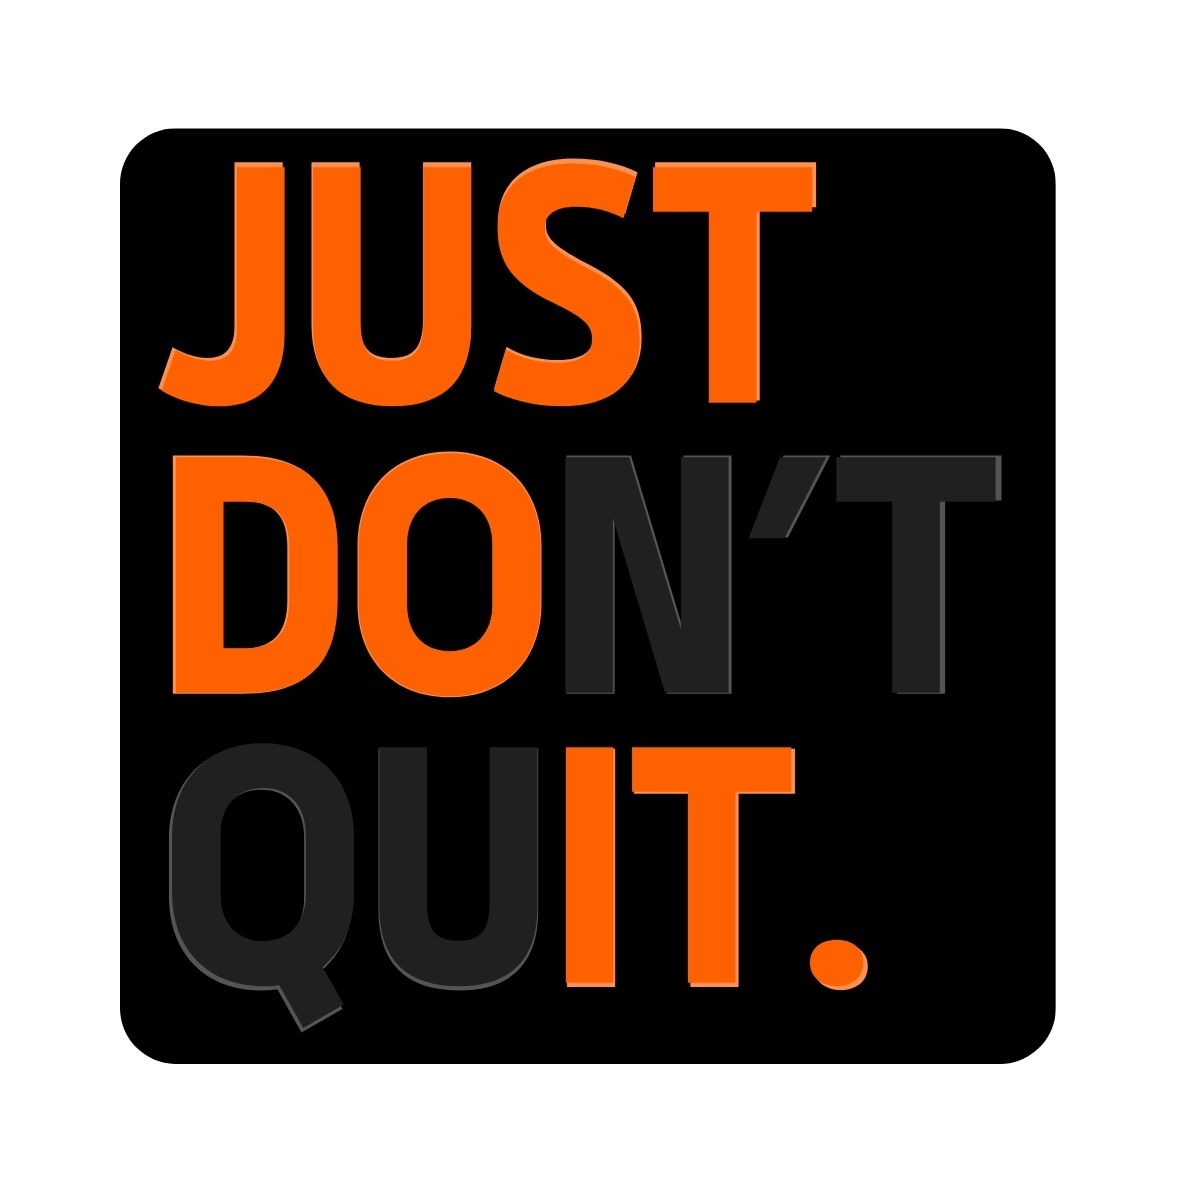 Just Don't Quit (Just Do It) Morale Patch